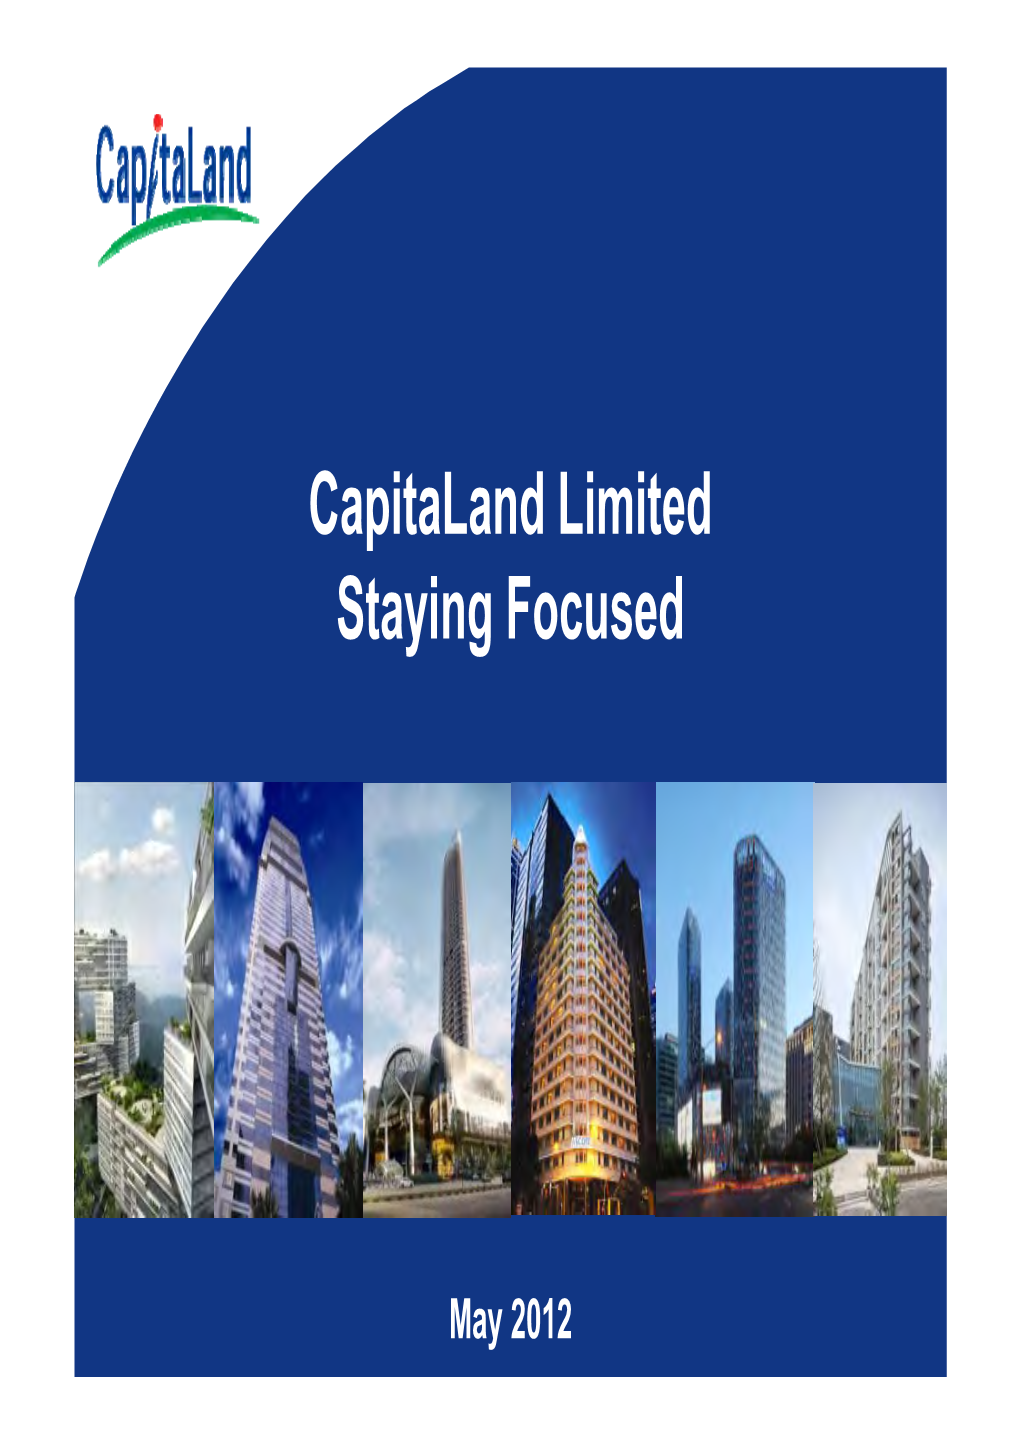 Capitaland Limited Staying Focused